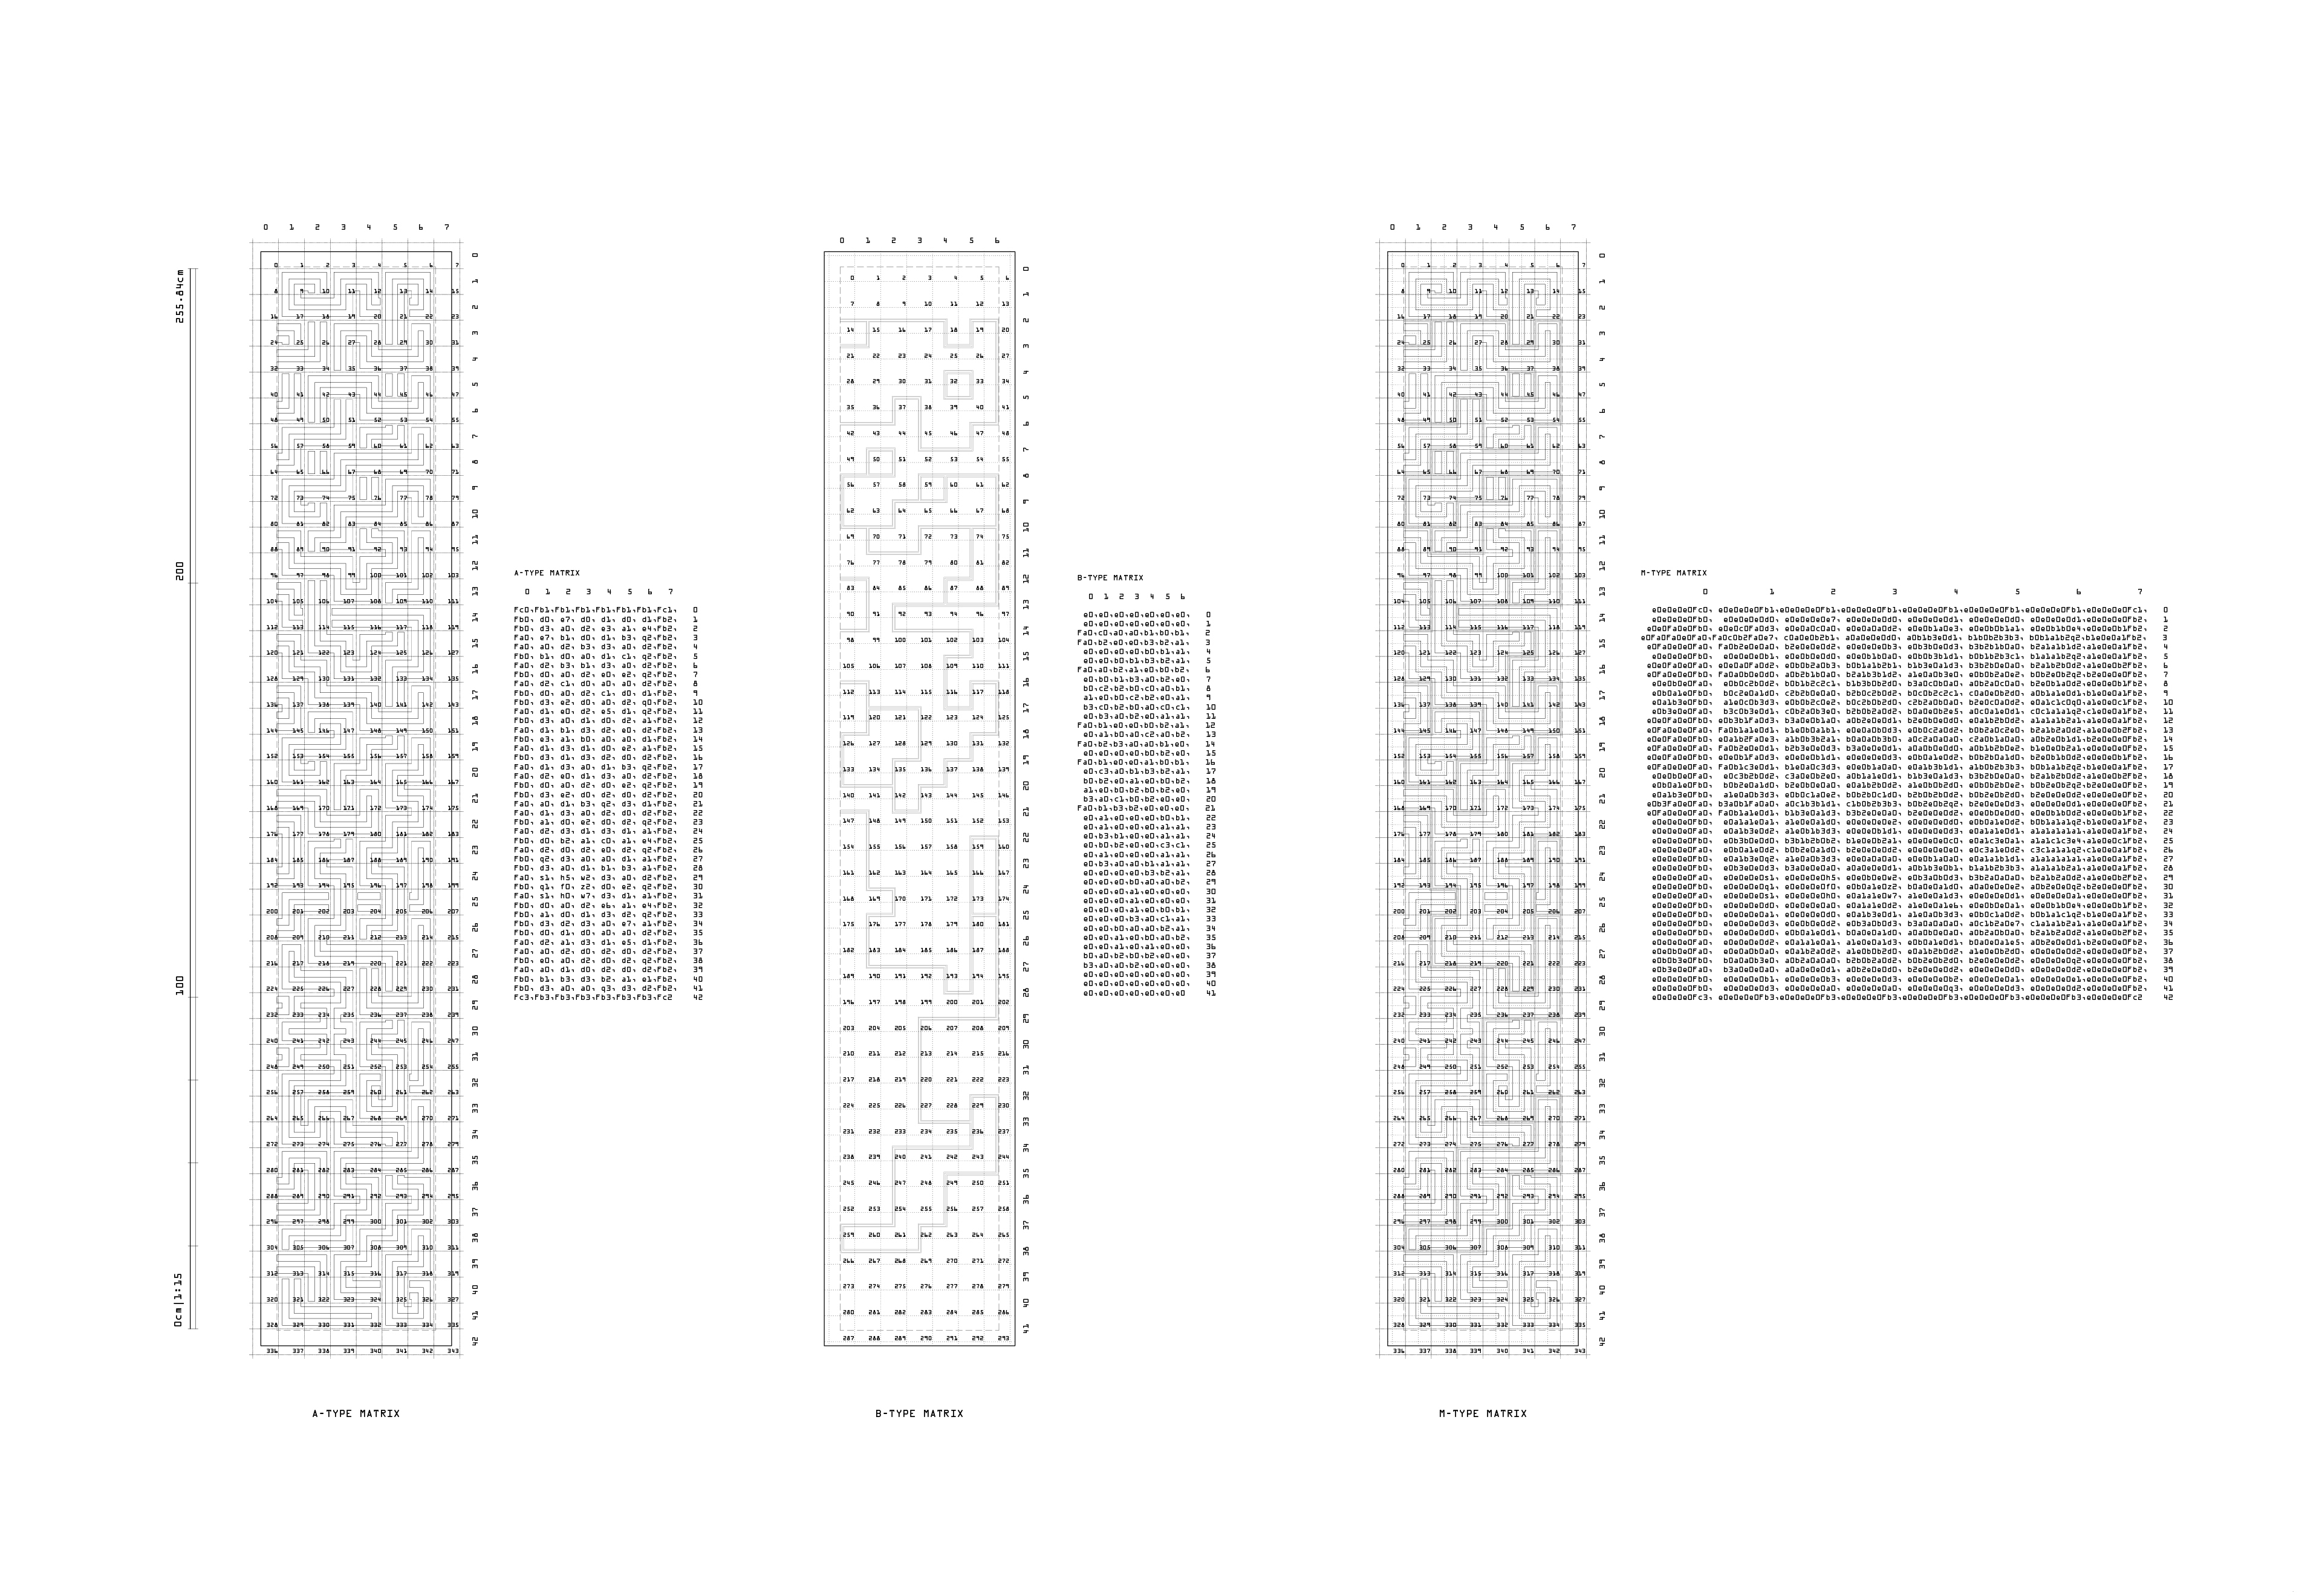 Distributed Panel Cell Matrices, A-Type, B-Type and Merged or M-type Presented as Technical Drawings and Digital Cell Keys, Plasticité+, An Implementation of Artificial Intelligence for the Design, Visualization and Digital Fabrication of a Referential Façade of Historical Chinese Art and Architecture, J.Travis Bennett Russett